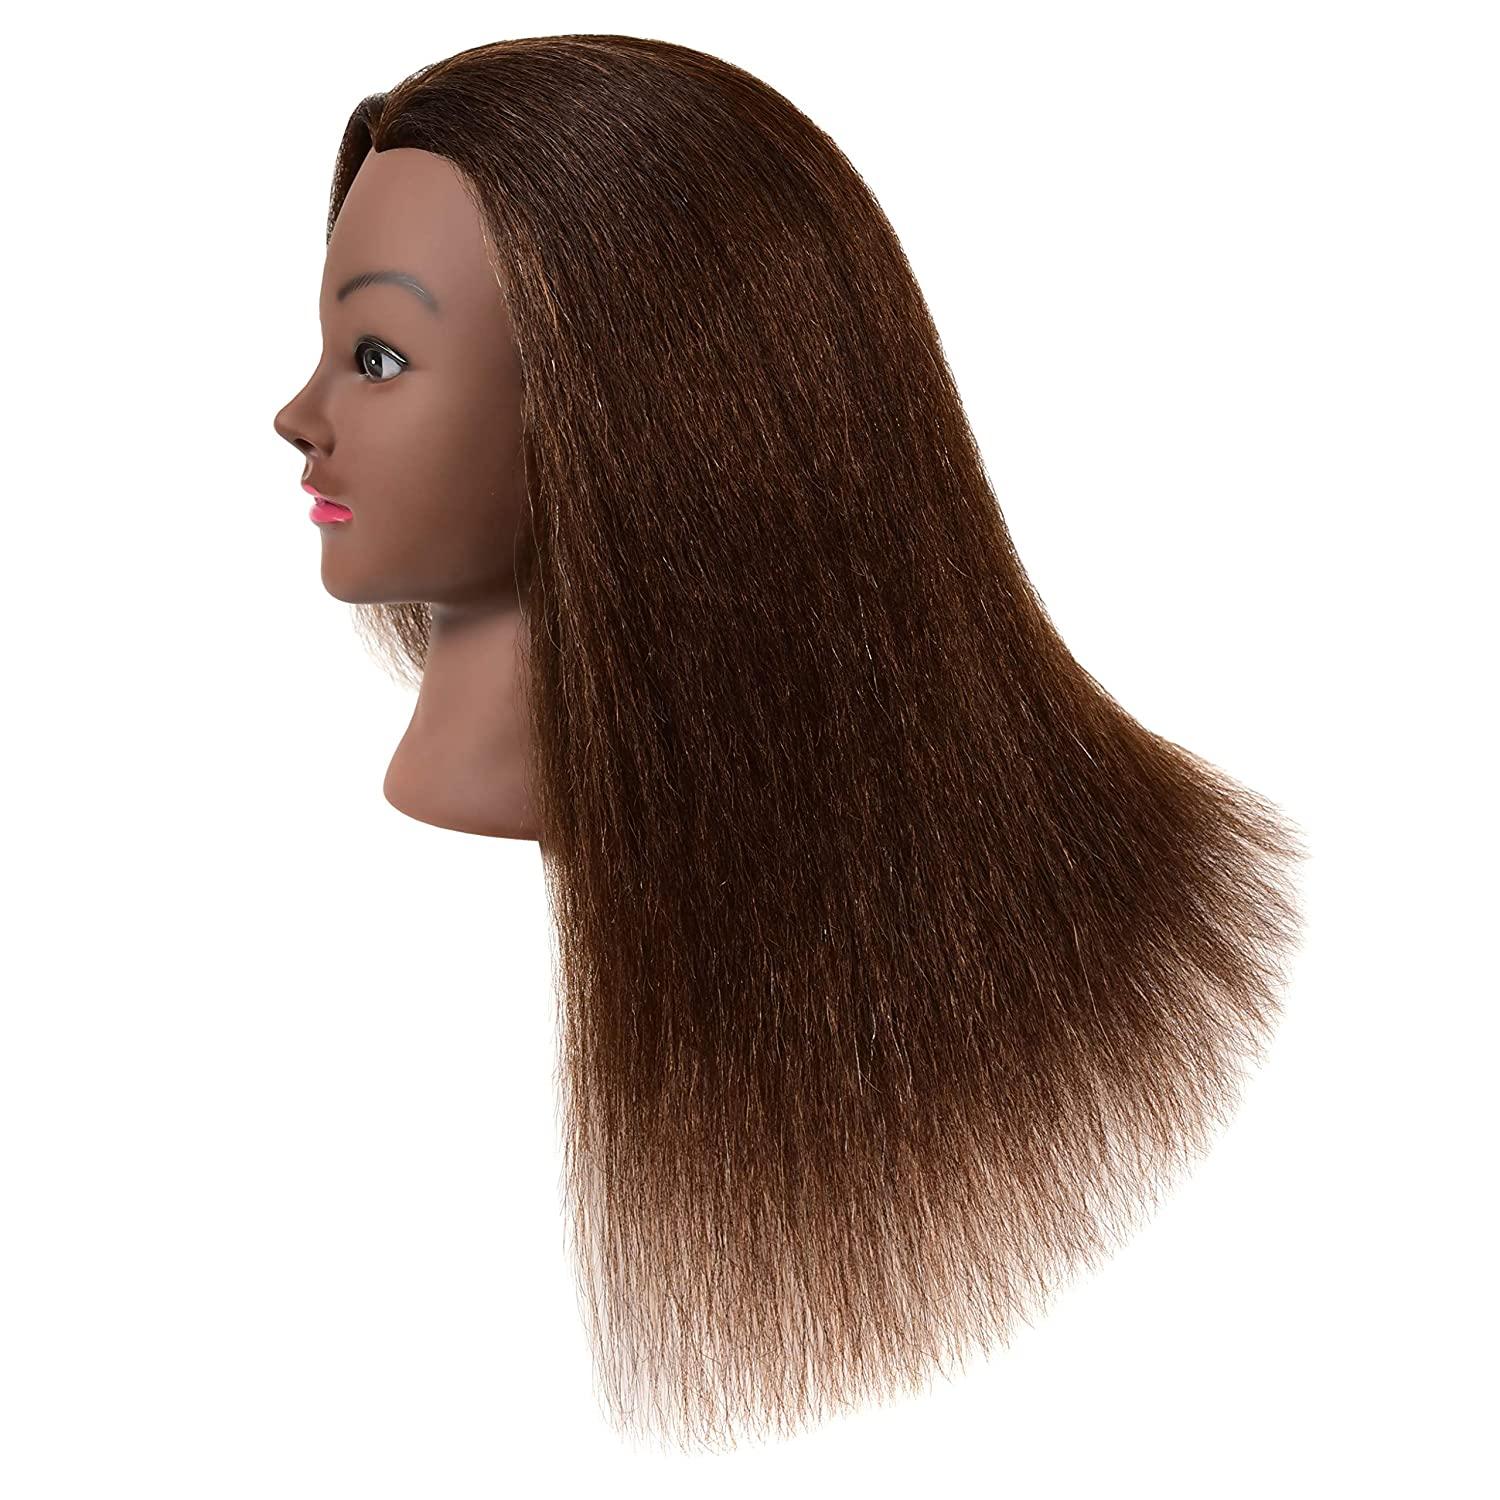 TIANYOUHAIR 22 Inch 100% Real Human Hair Mannequin Head Manikin Cosmetology  Doll Heads with Stand for Braiding Styling Display Practice Training  Coloring Bleaching Dyeing Curling Cutting Updos Brown